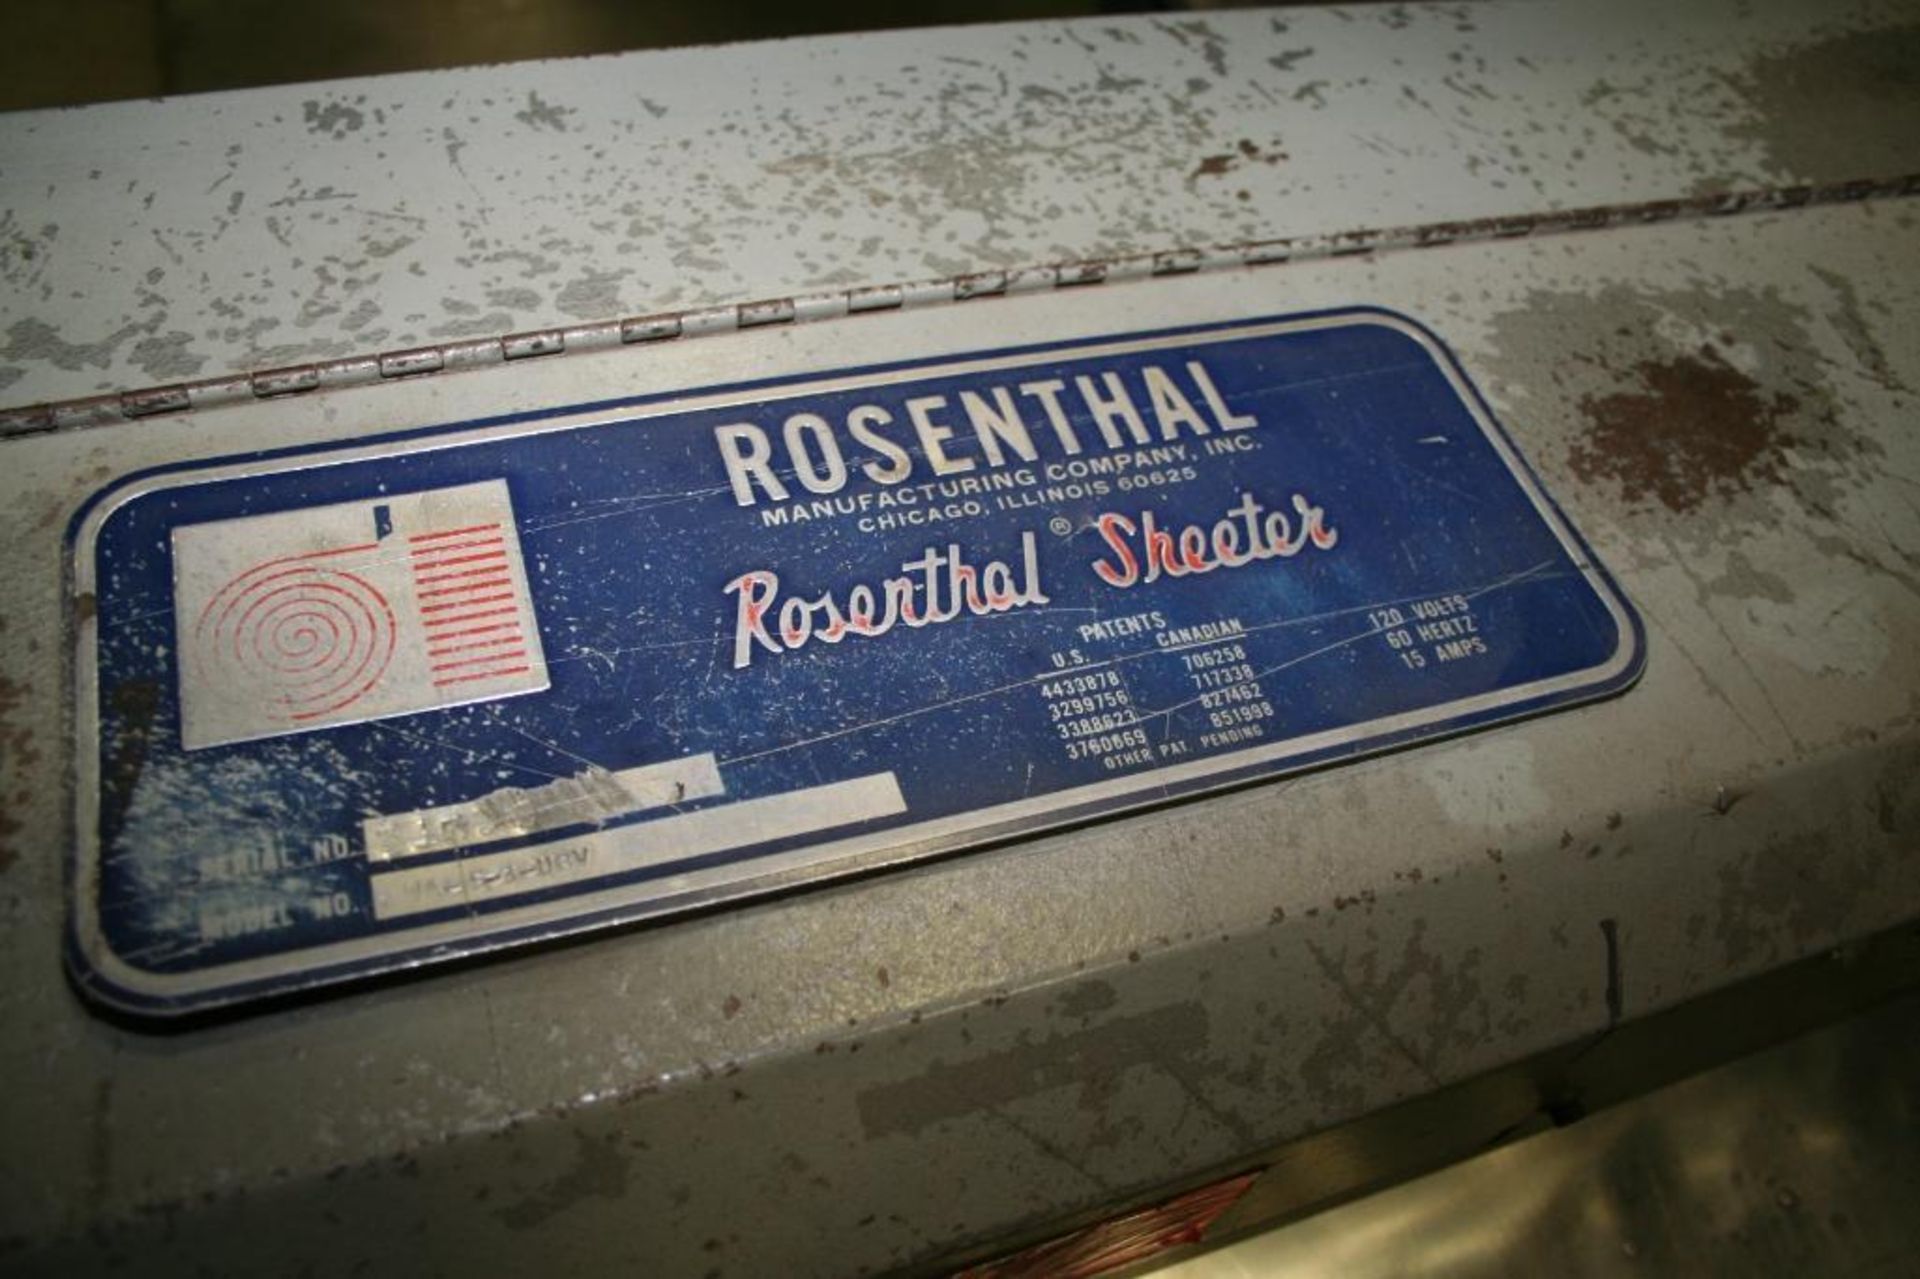 Rosenthal Sheeter 36" Model WA-S-3-UBV Serial #51533515360, Located at 3002 North Apollo Drive Urban - Image 3 of 8